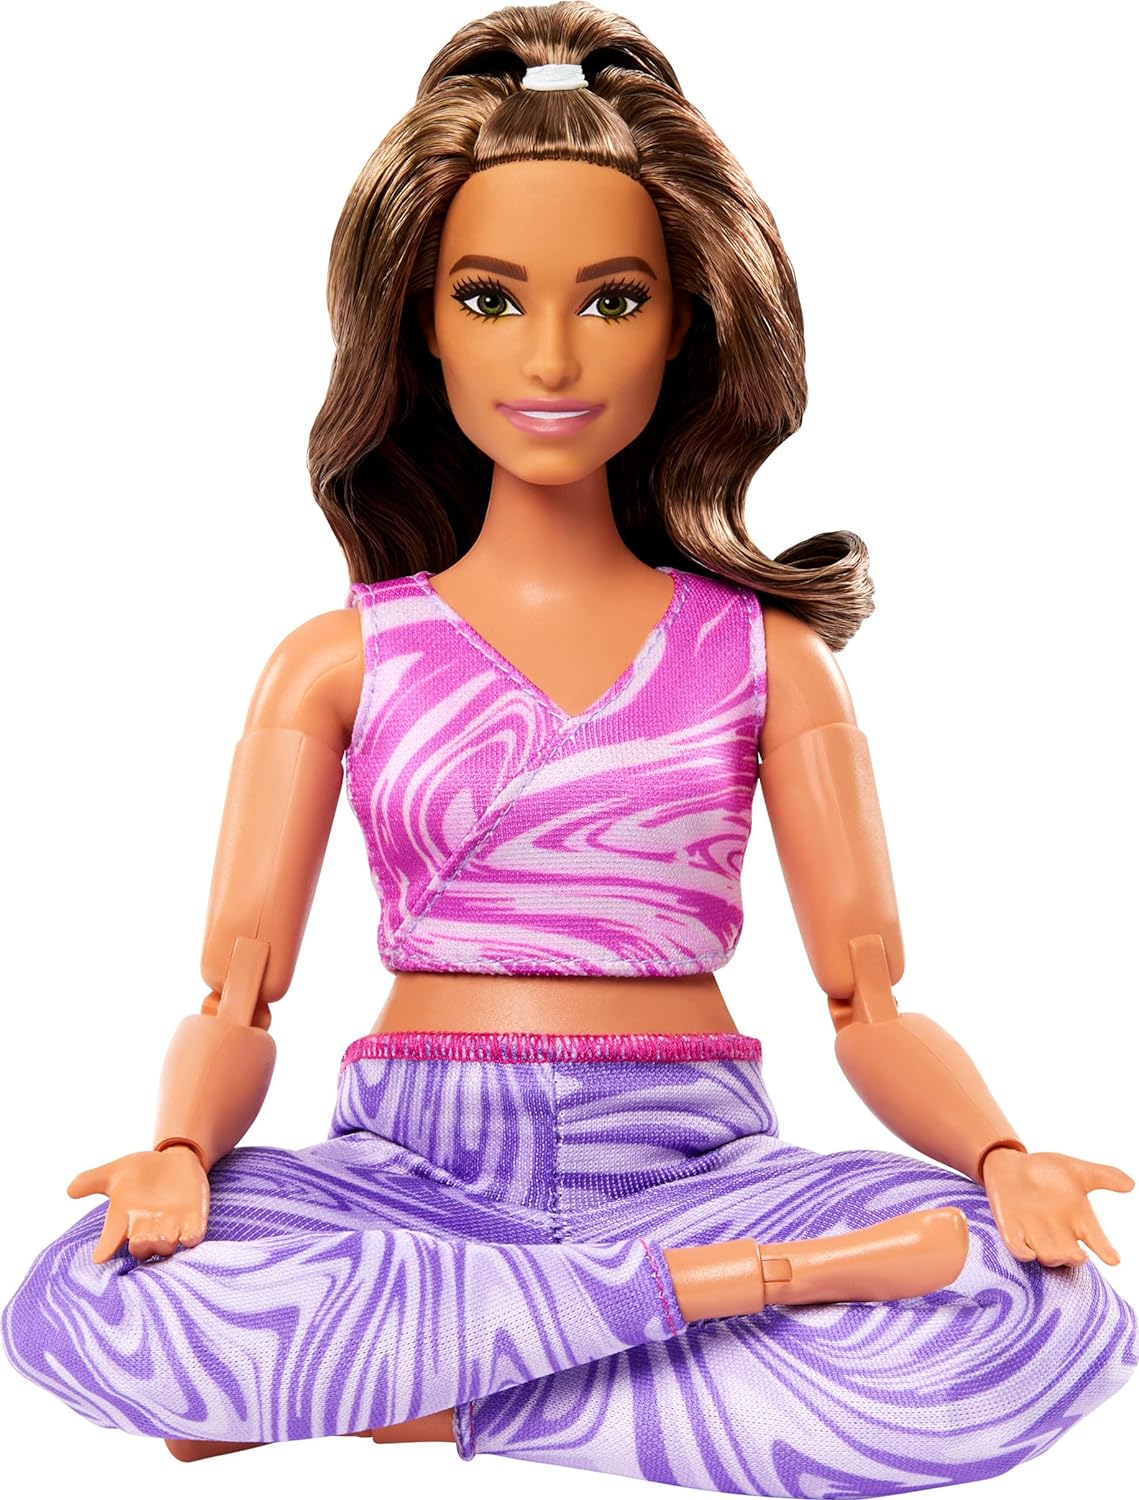 Barbie Made to Move Fashion Doll with Curvy Body & Brunette Hair Wearing Removable Pink Sports Top & Purple Yoga Pants, 22 Bendable Joints